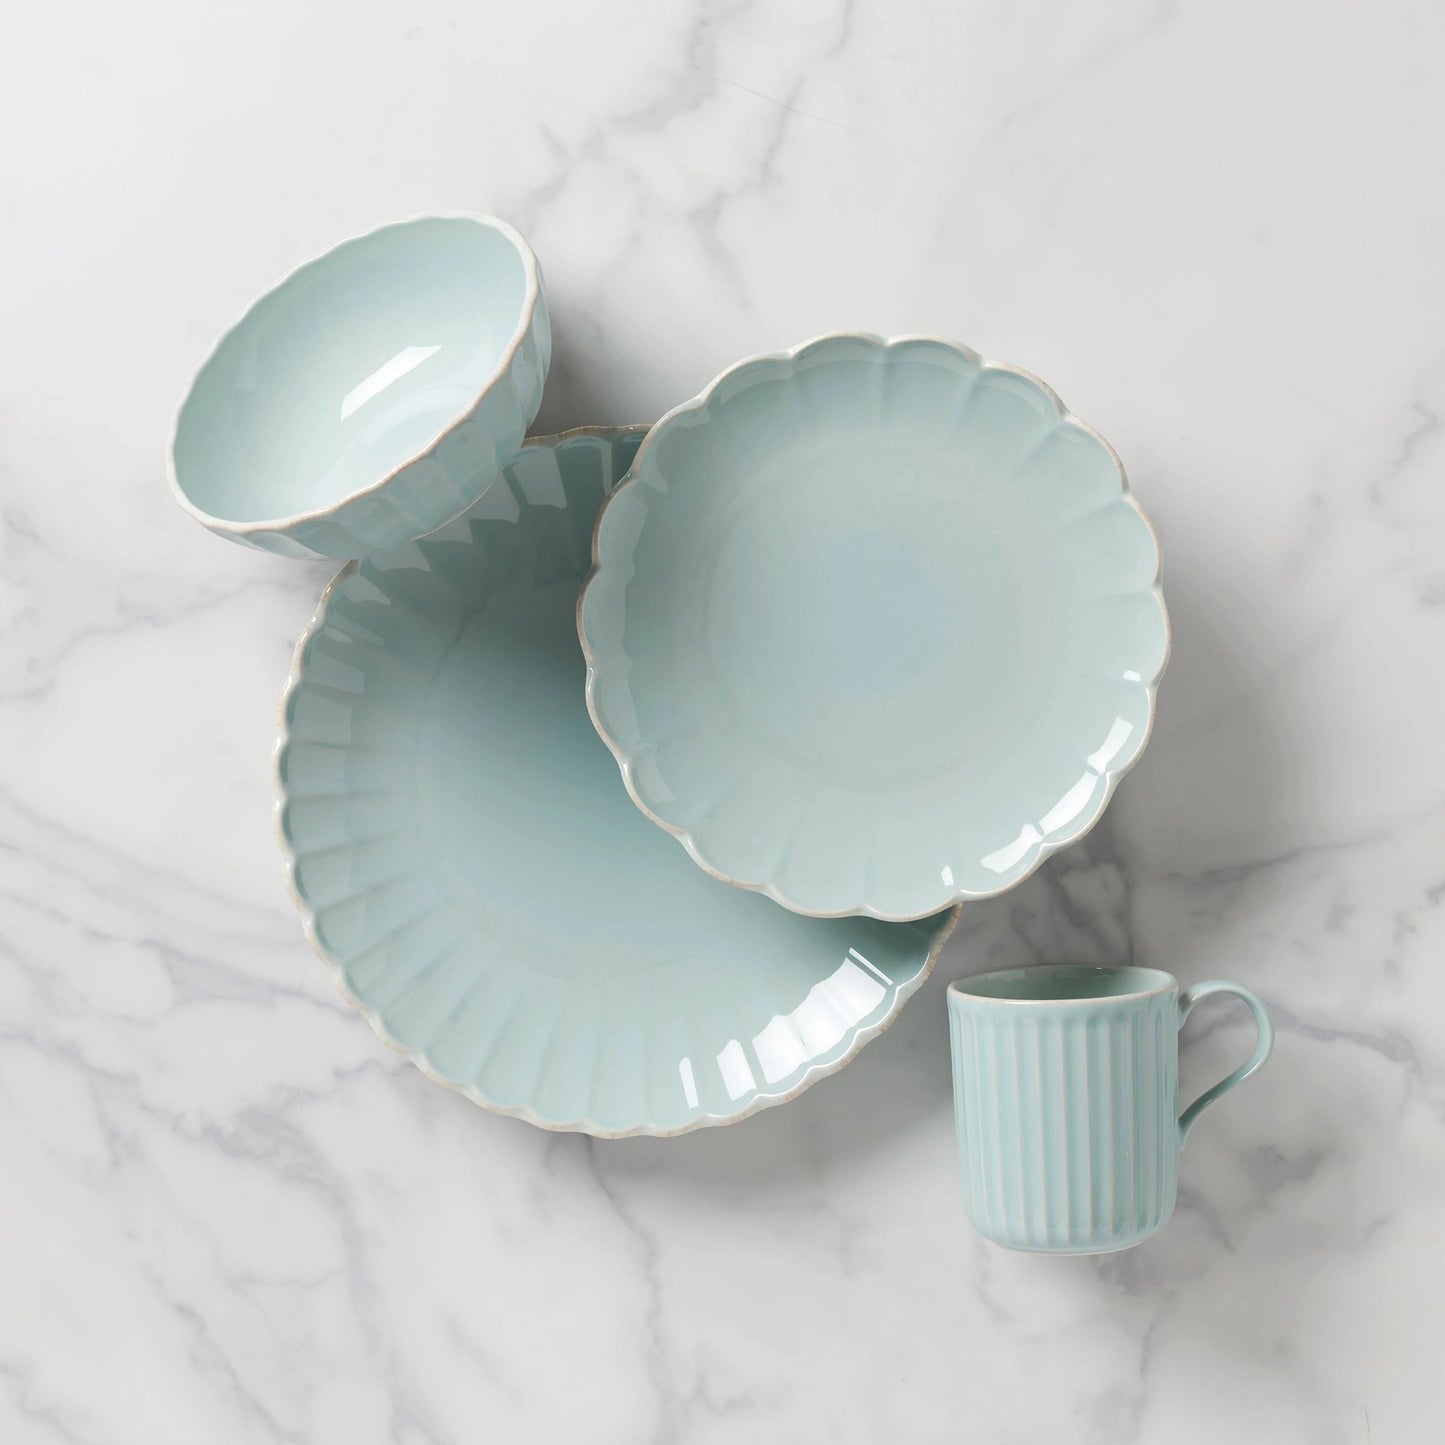 French Perle Scallop Ice Blue 4-Piece Place Setting by Lenox